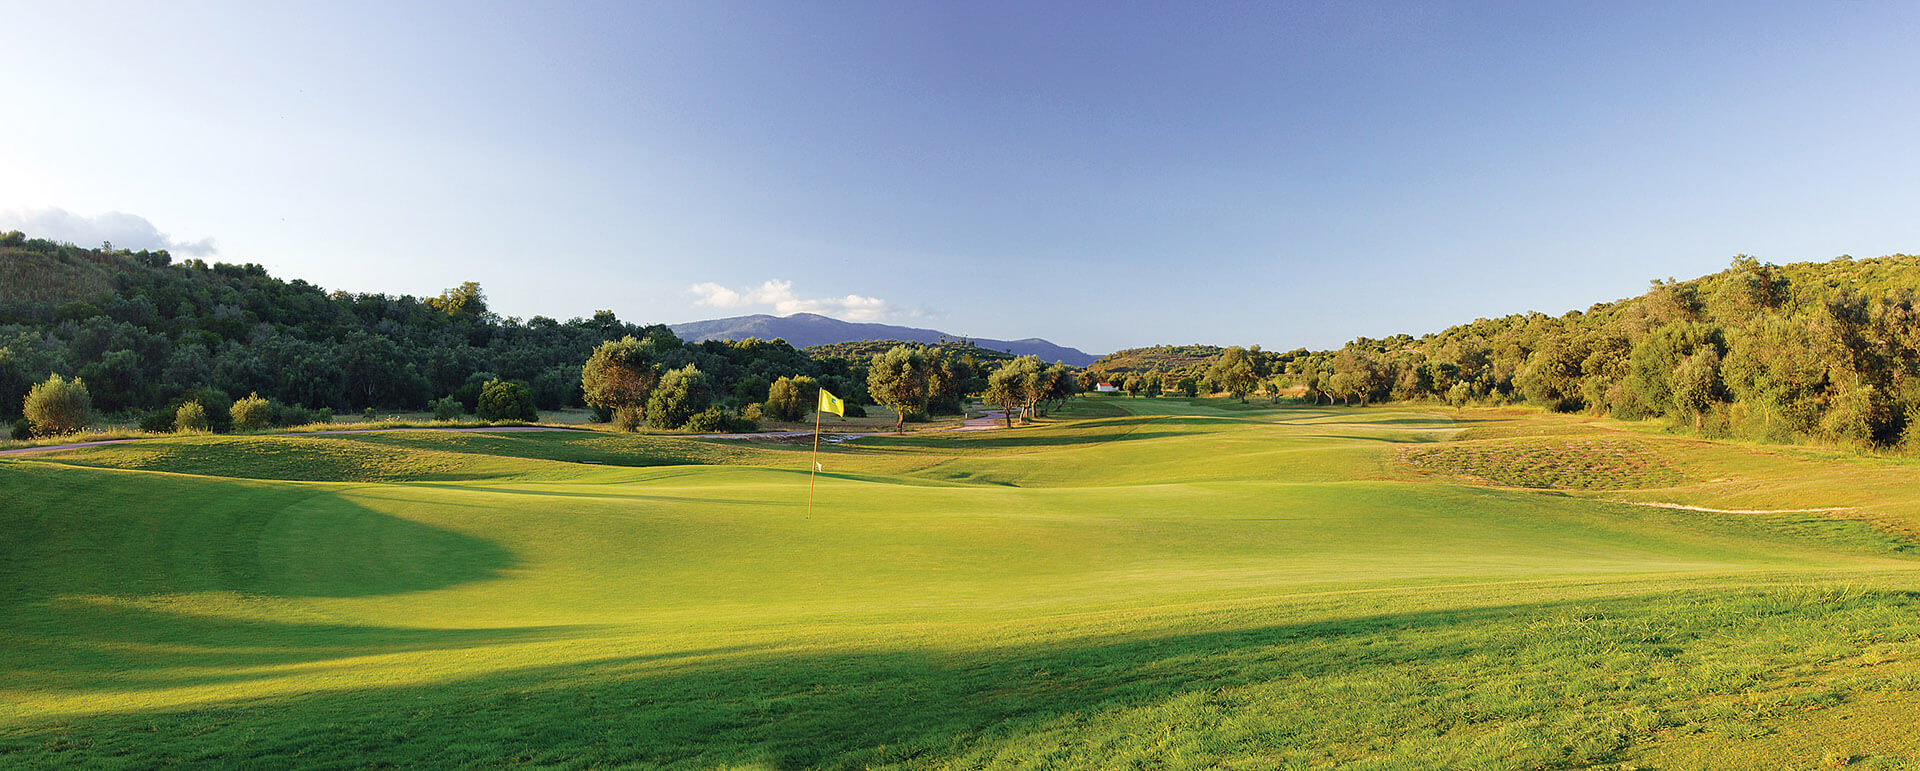 Alamos Golf Course in Algarve • Quo Vadis Portugal Golf Tee Times